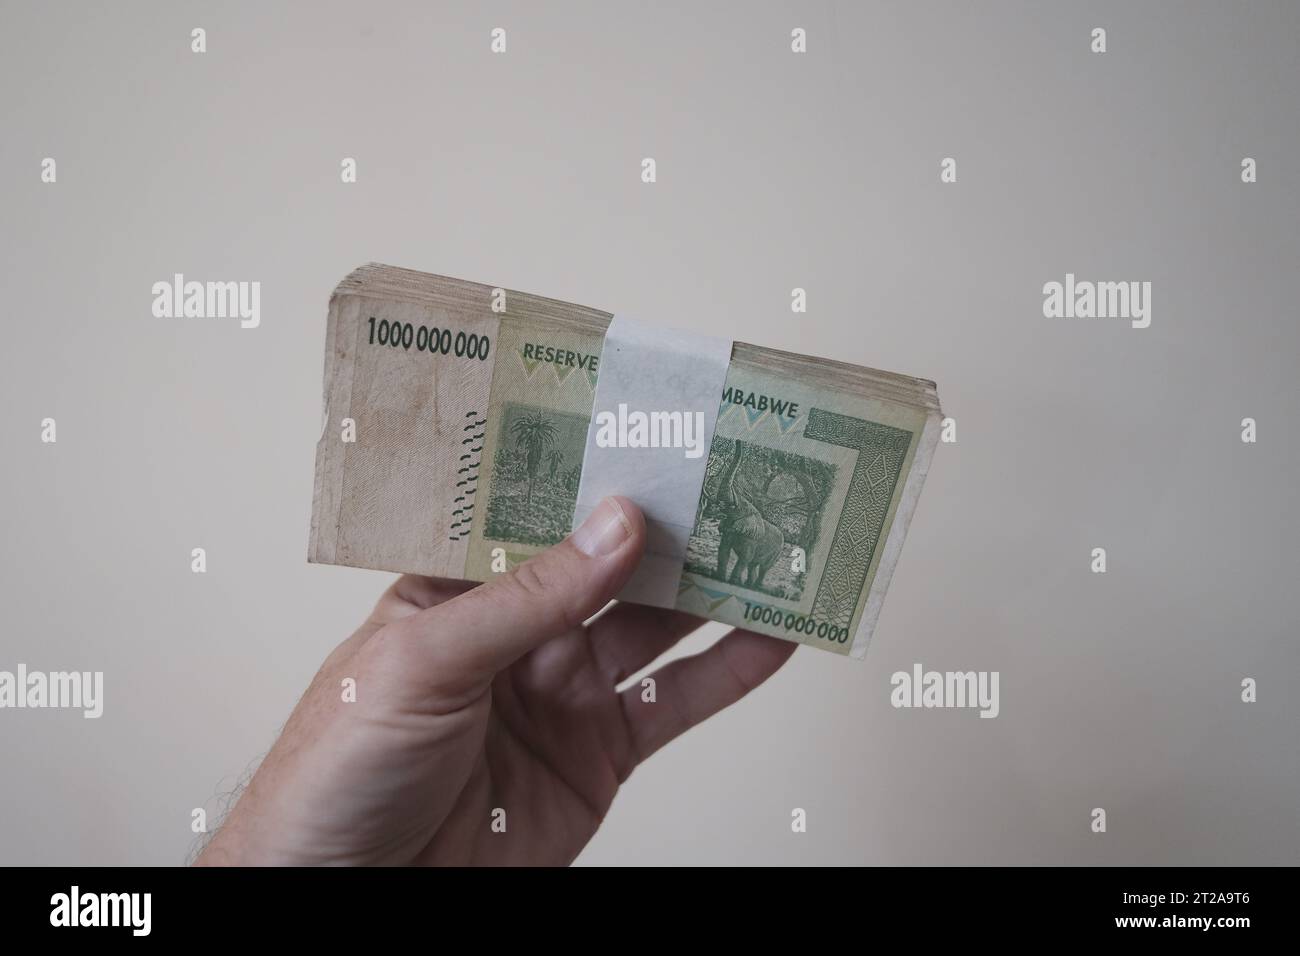 Stacks of Cash - Millions, Billions of Dollars. Zimbabwe Dollars after hyper inflation. Each note is One Billion Dollars Stock Photo